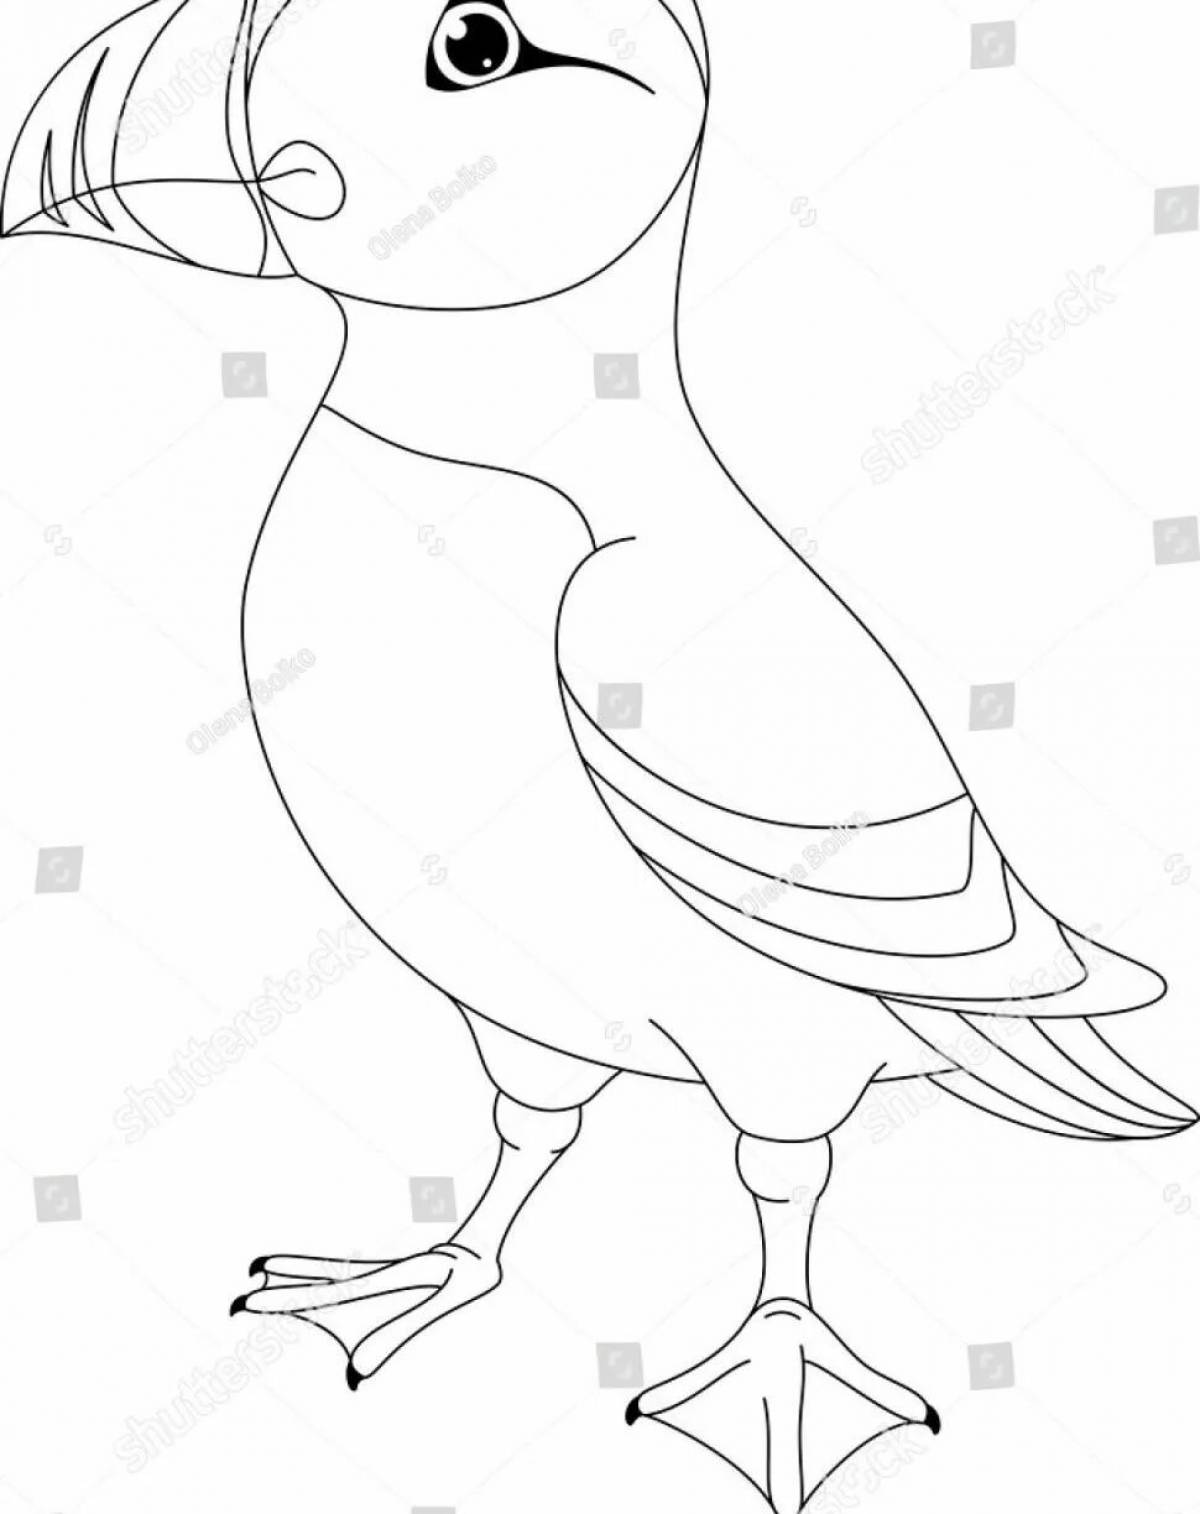 Coloring book witty puffin bird